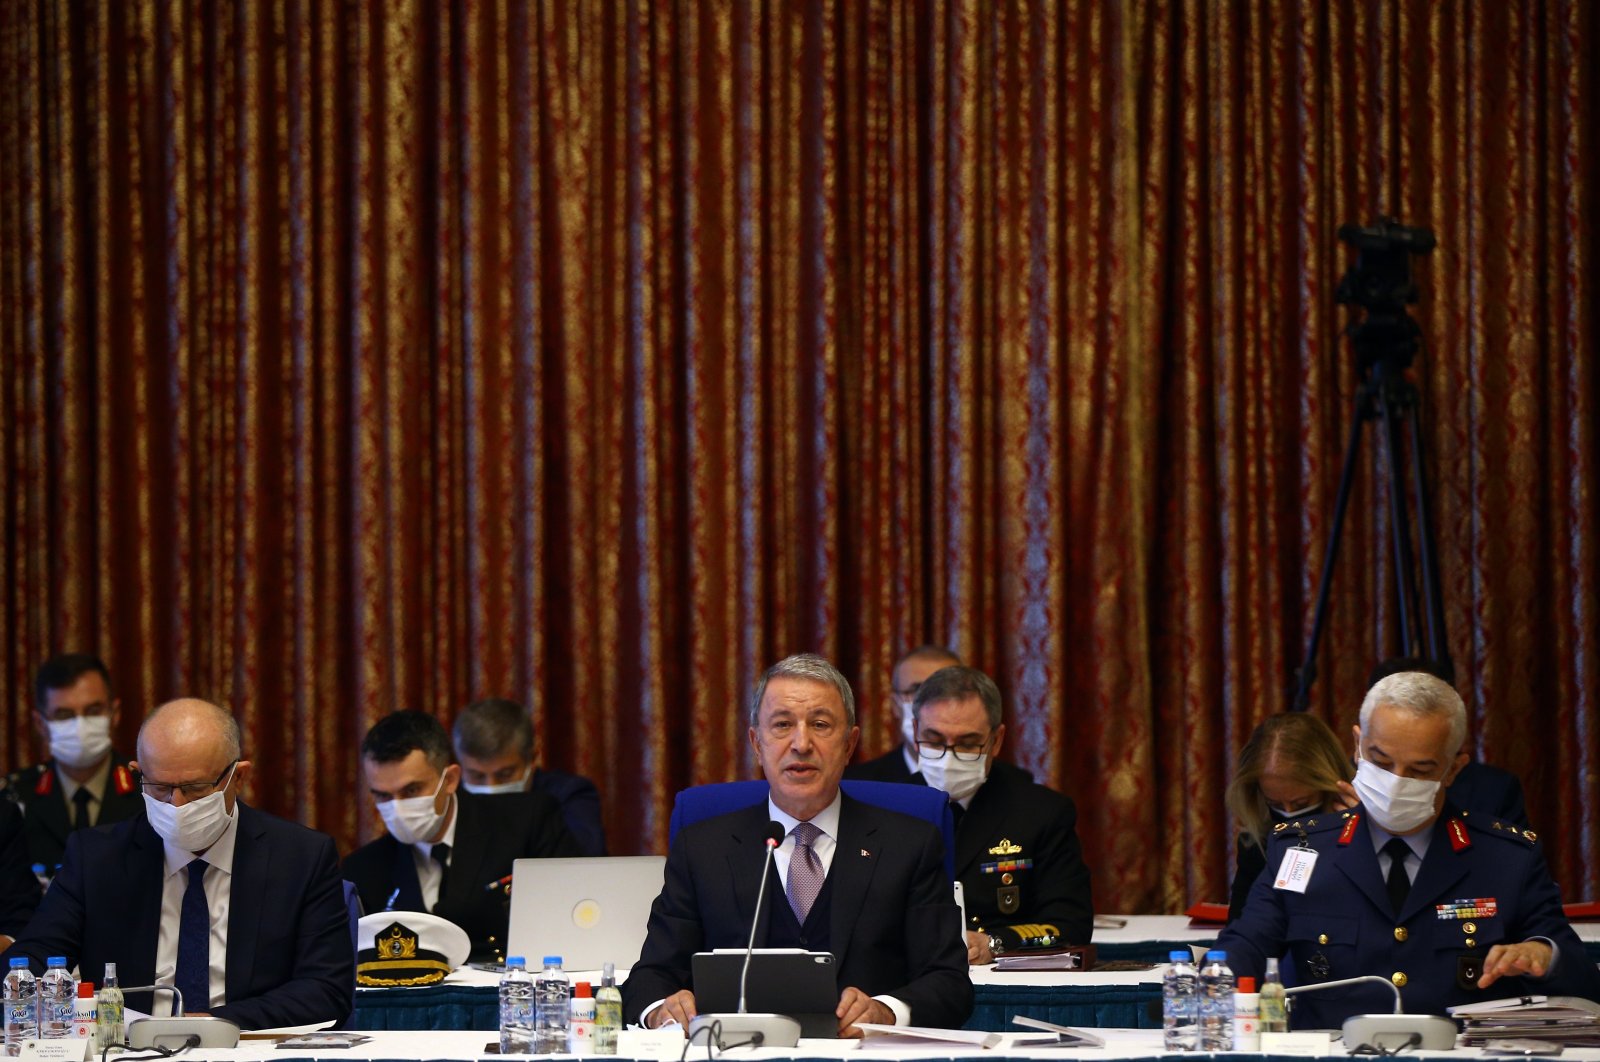 Defense Minister Hulusi Akar speaks during the Parliament's Planning and Budgetary Commission in Ankara, Turkey, Nov. 11, 2020. (AA Photo)